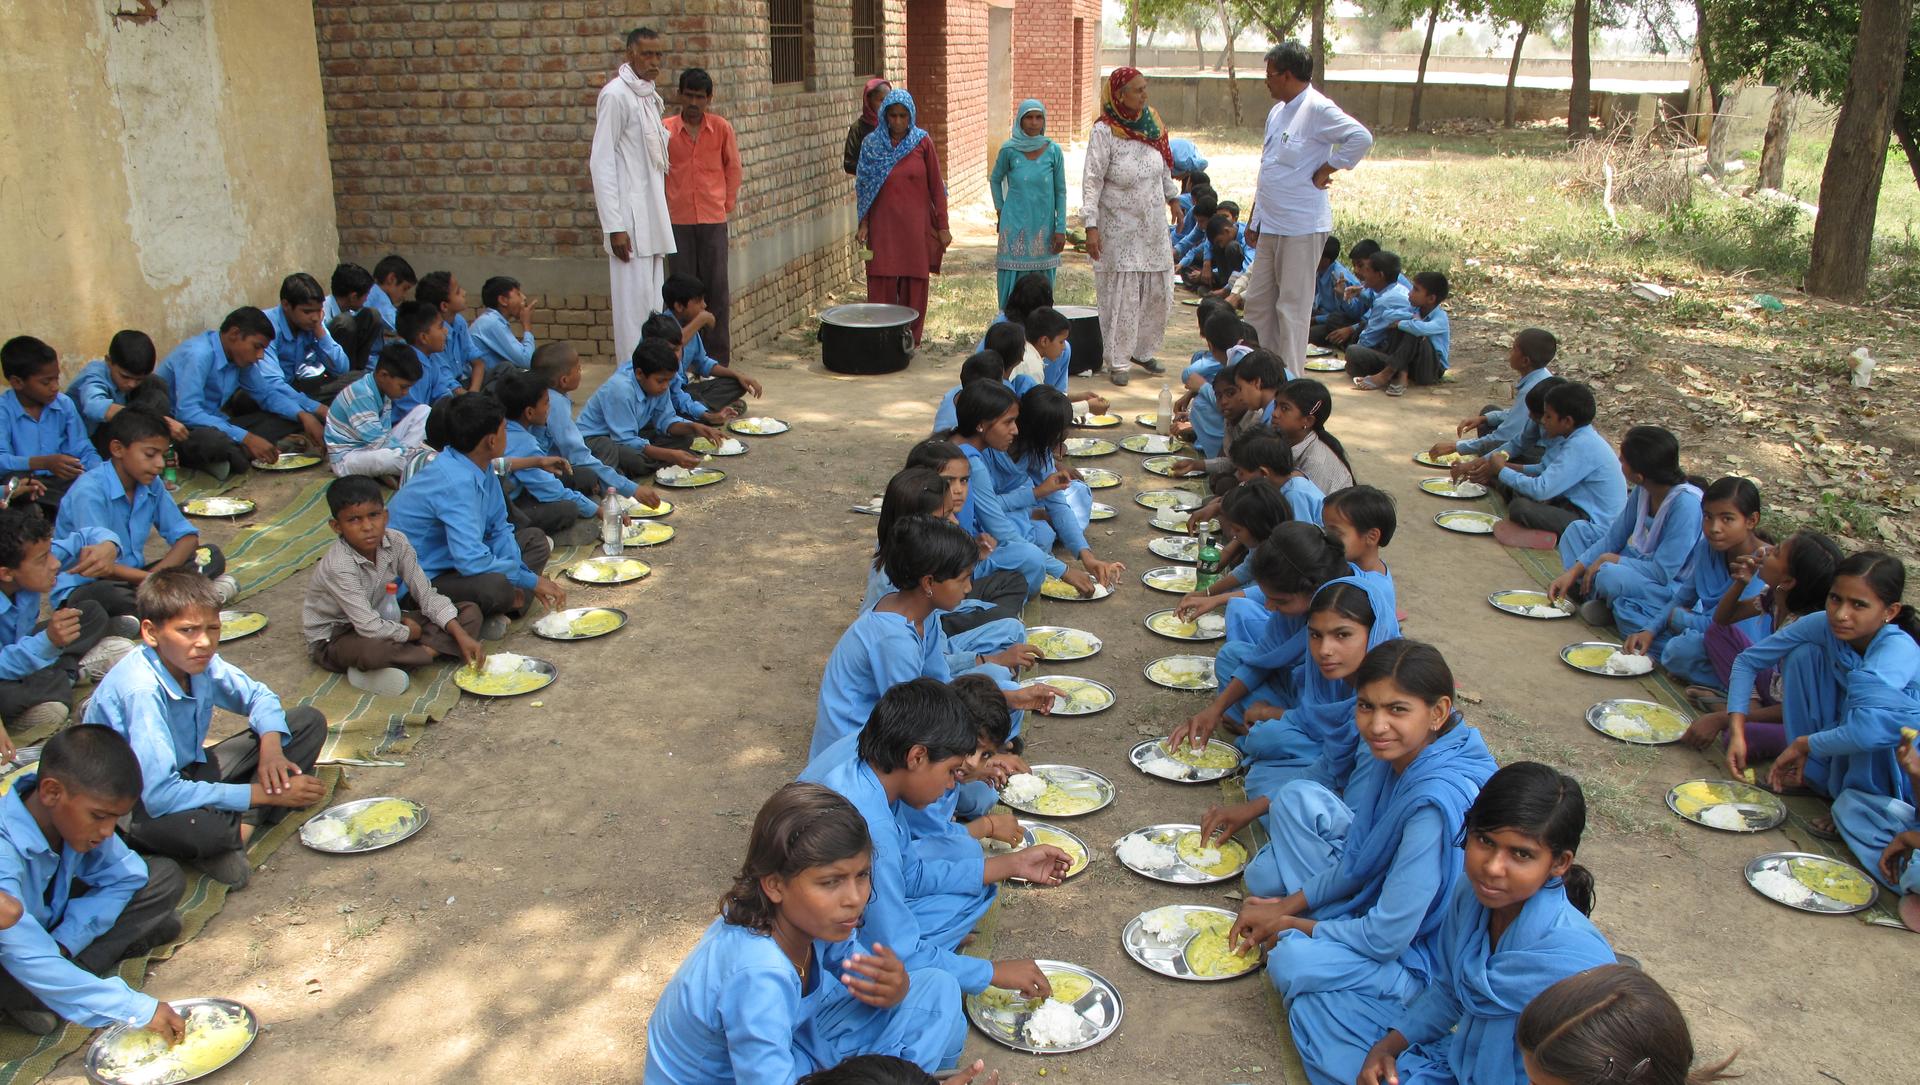 Schoolchildren in Haryana, India eat rice and kadhi, a curry made with onions, garlic, yogurt and fritters made with chick pea flour.